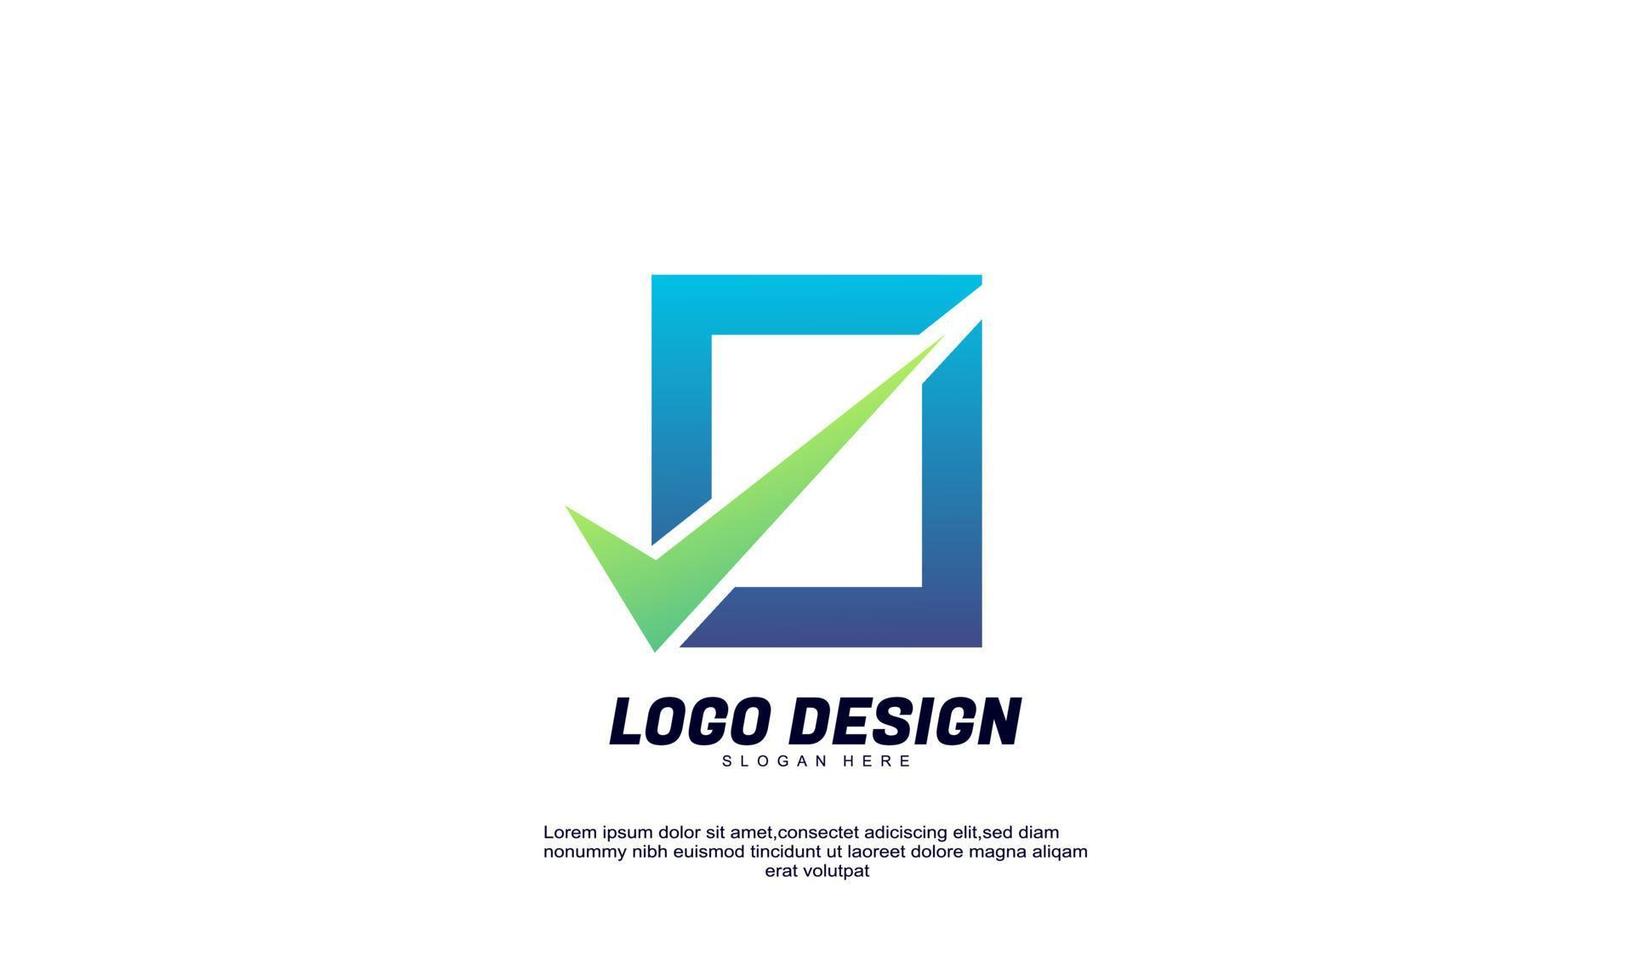 awesome creative logo rectangle and check for business success stock story market progress logo icon vector